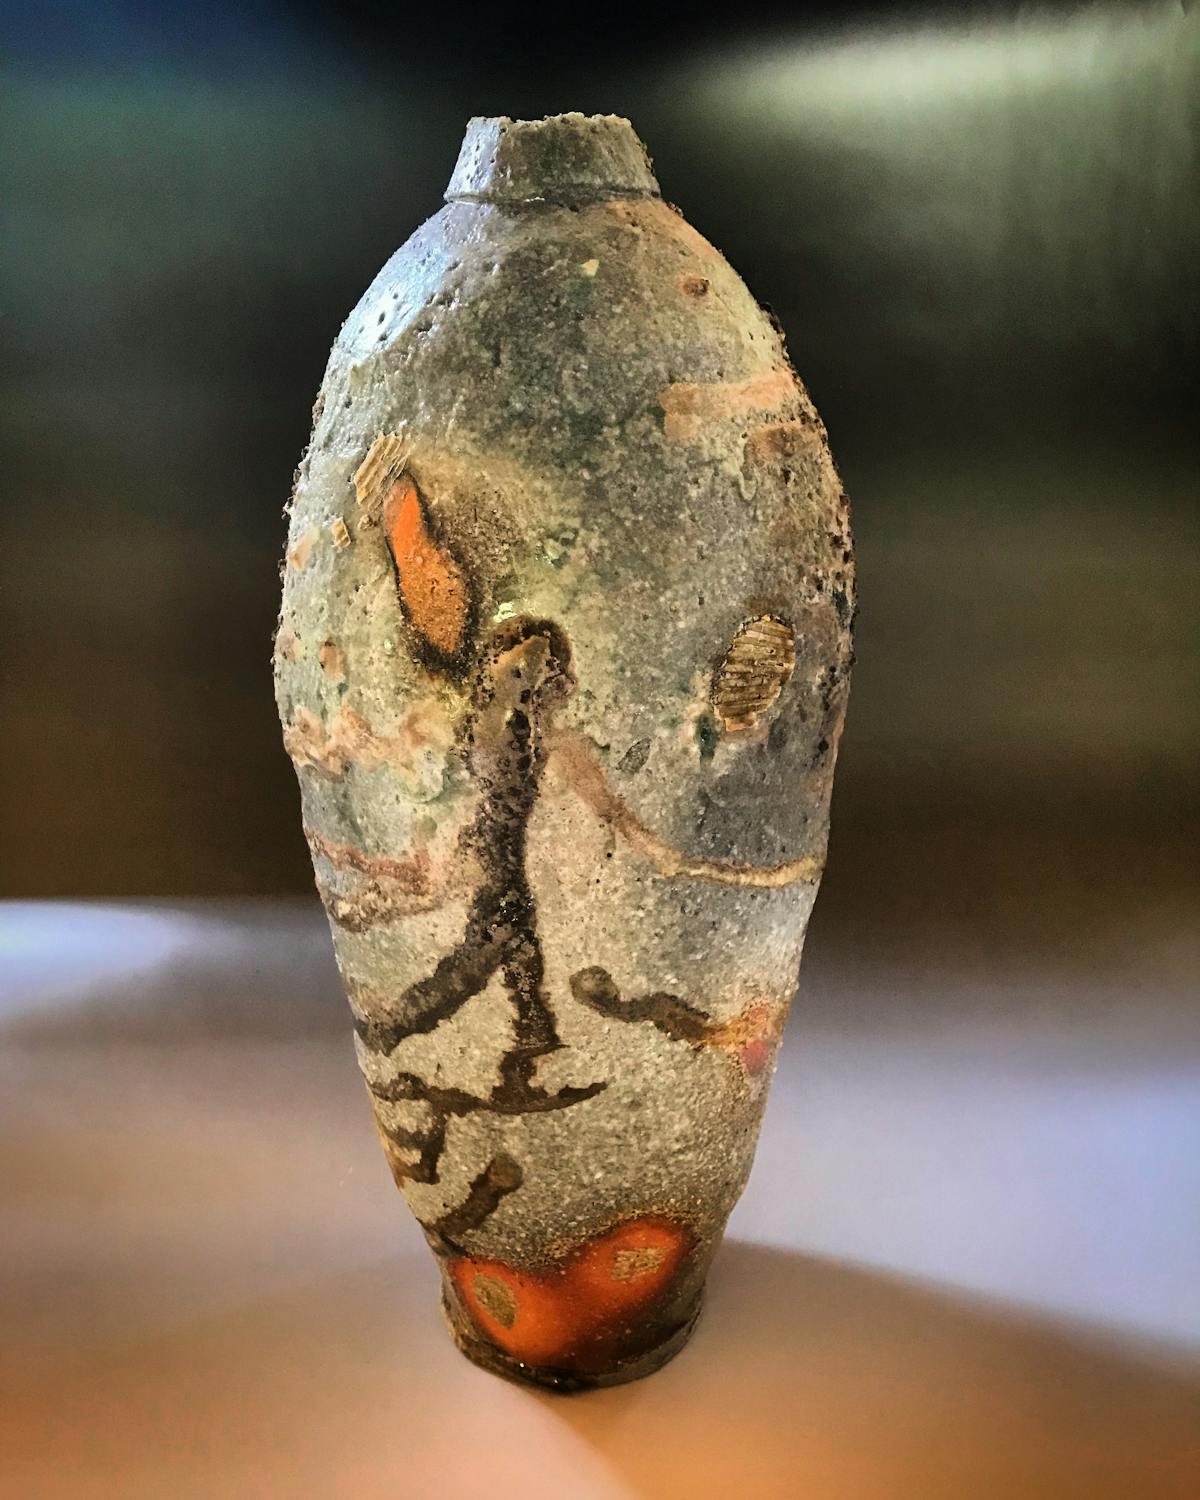 stoneware bottle with rough pocked texture and mottled coloration